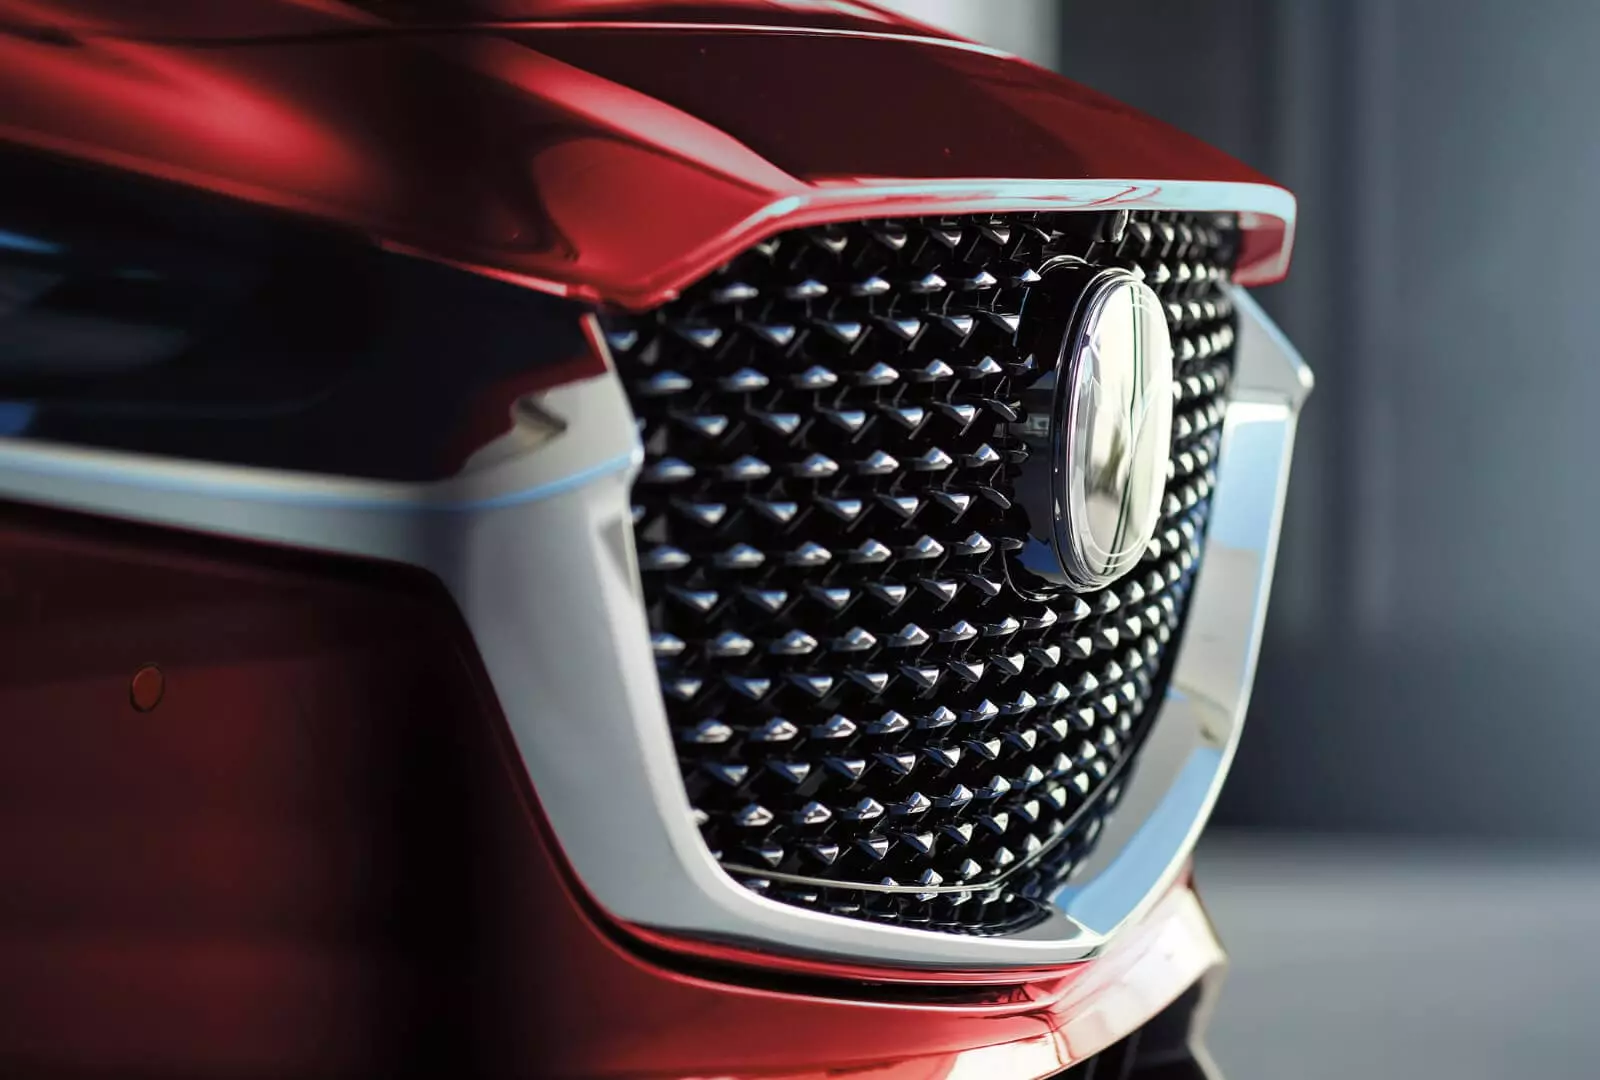 Front grille of a Mazda vehicle.